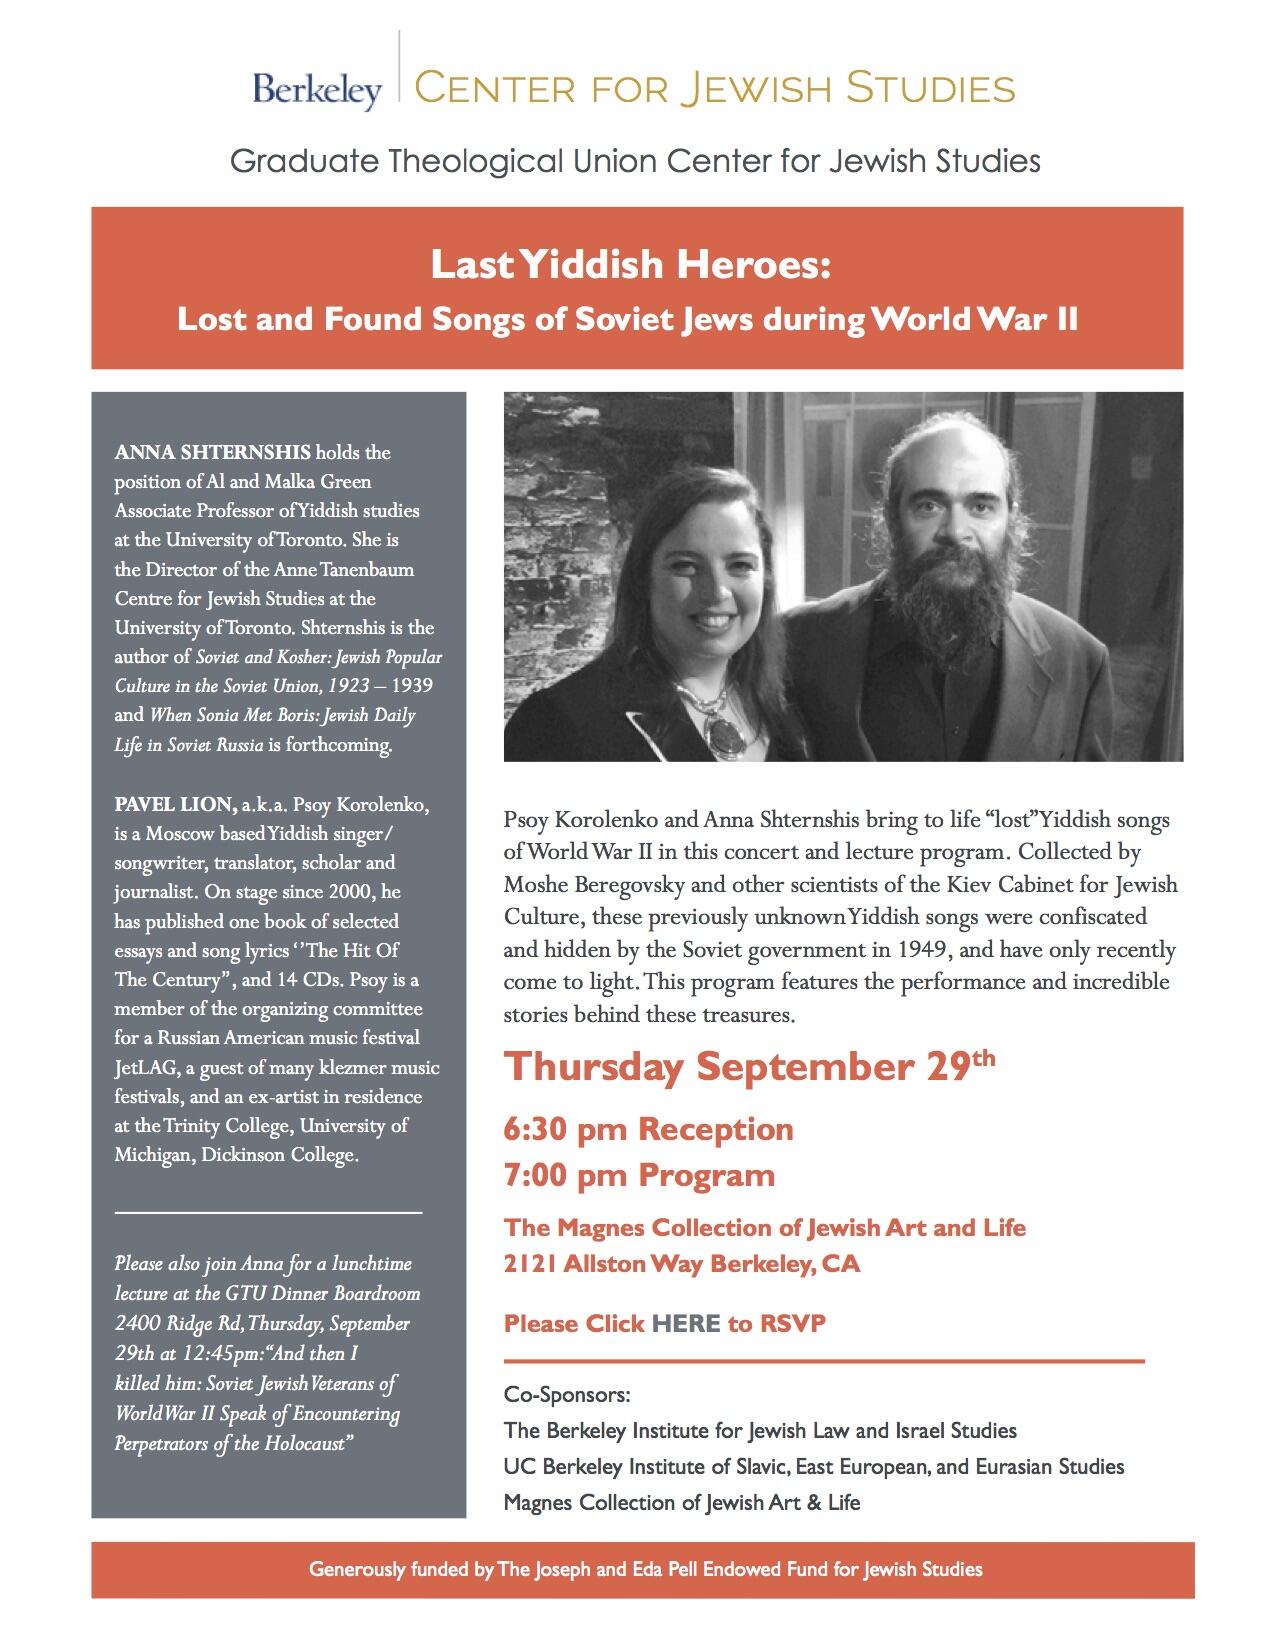 “LAST YIDDISH HEROES” WITH ANNA SHTERNSHIS AND PSOY KOROLENKO